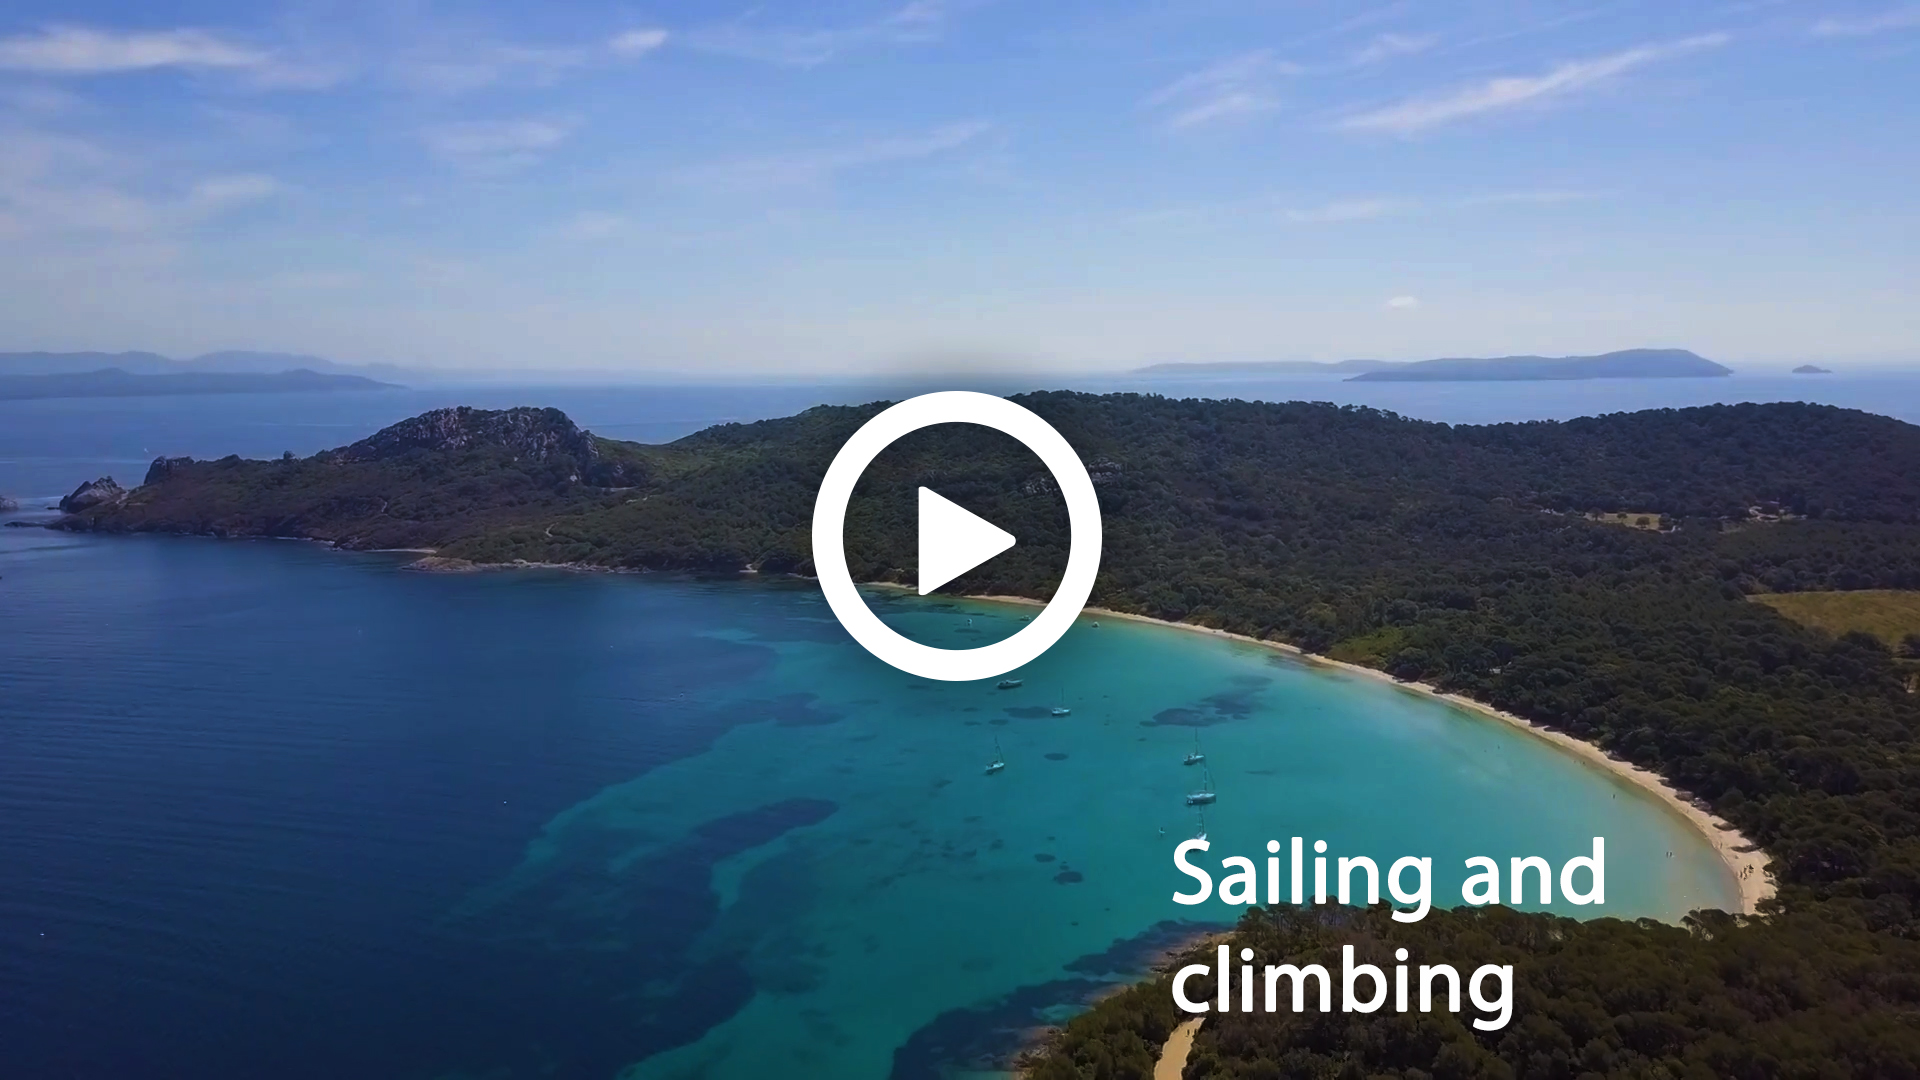 Sailing video to sale - Sailing and climbing video